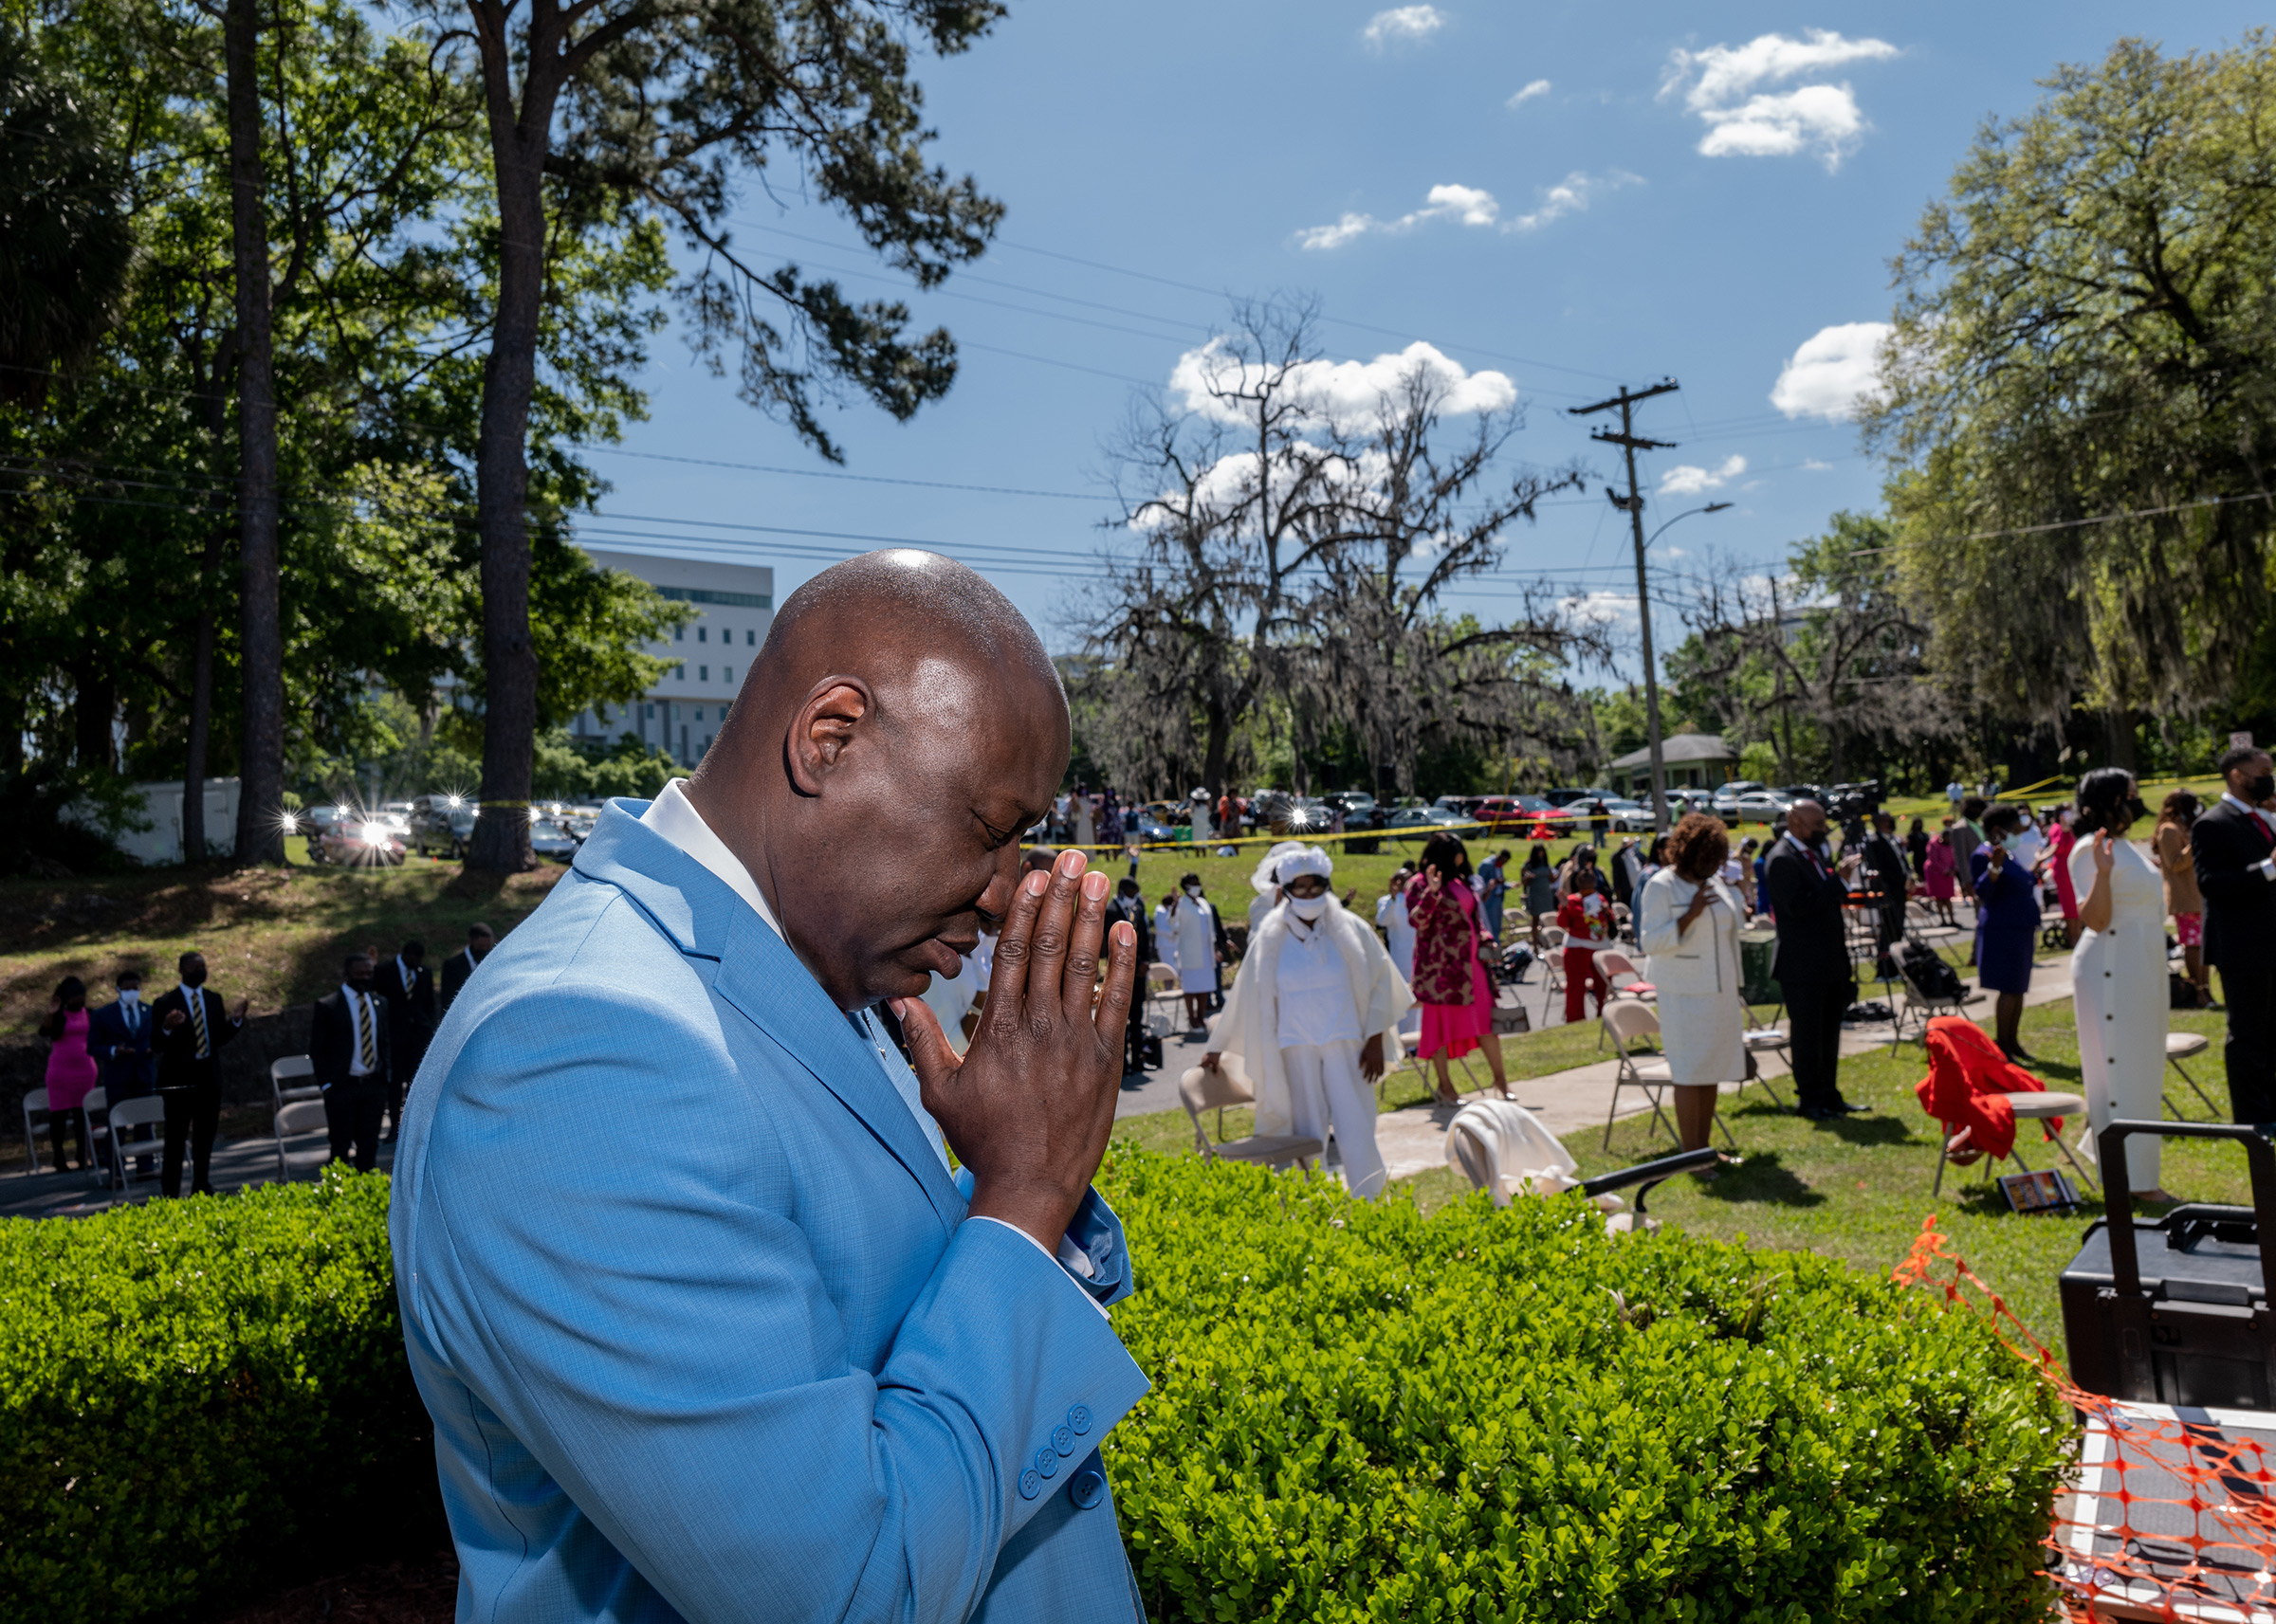 Crump attends Easter Sunday Mass at Bethel Missionary Baptist Church in Tallahassee, Fla., on April 4. (Ruddy Roye for TIME)